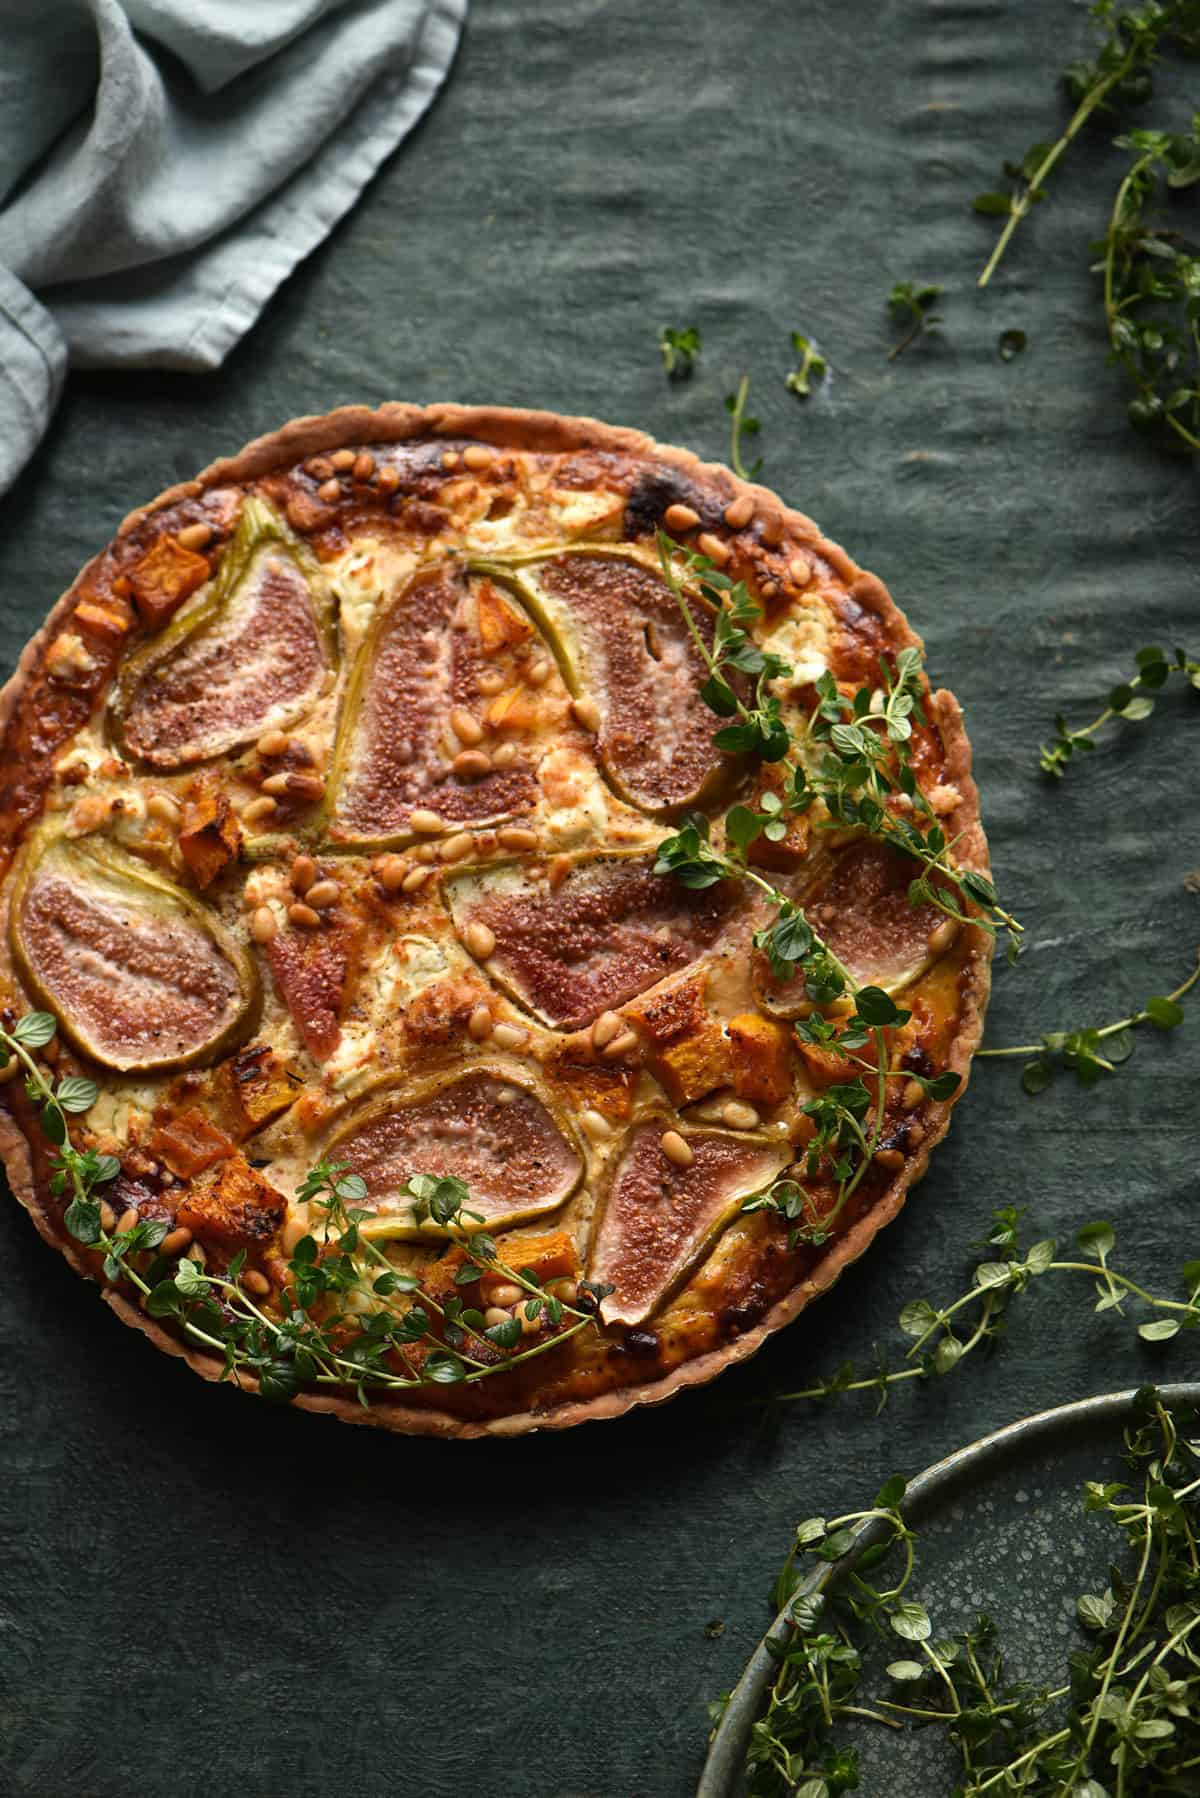 Savoury fig, pumpkin and goats cheese tart in a gluten free crust on a green backdrop with scattered herbs